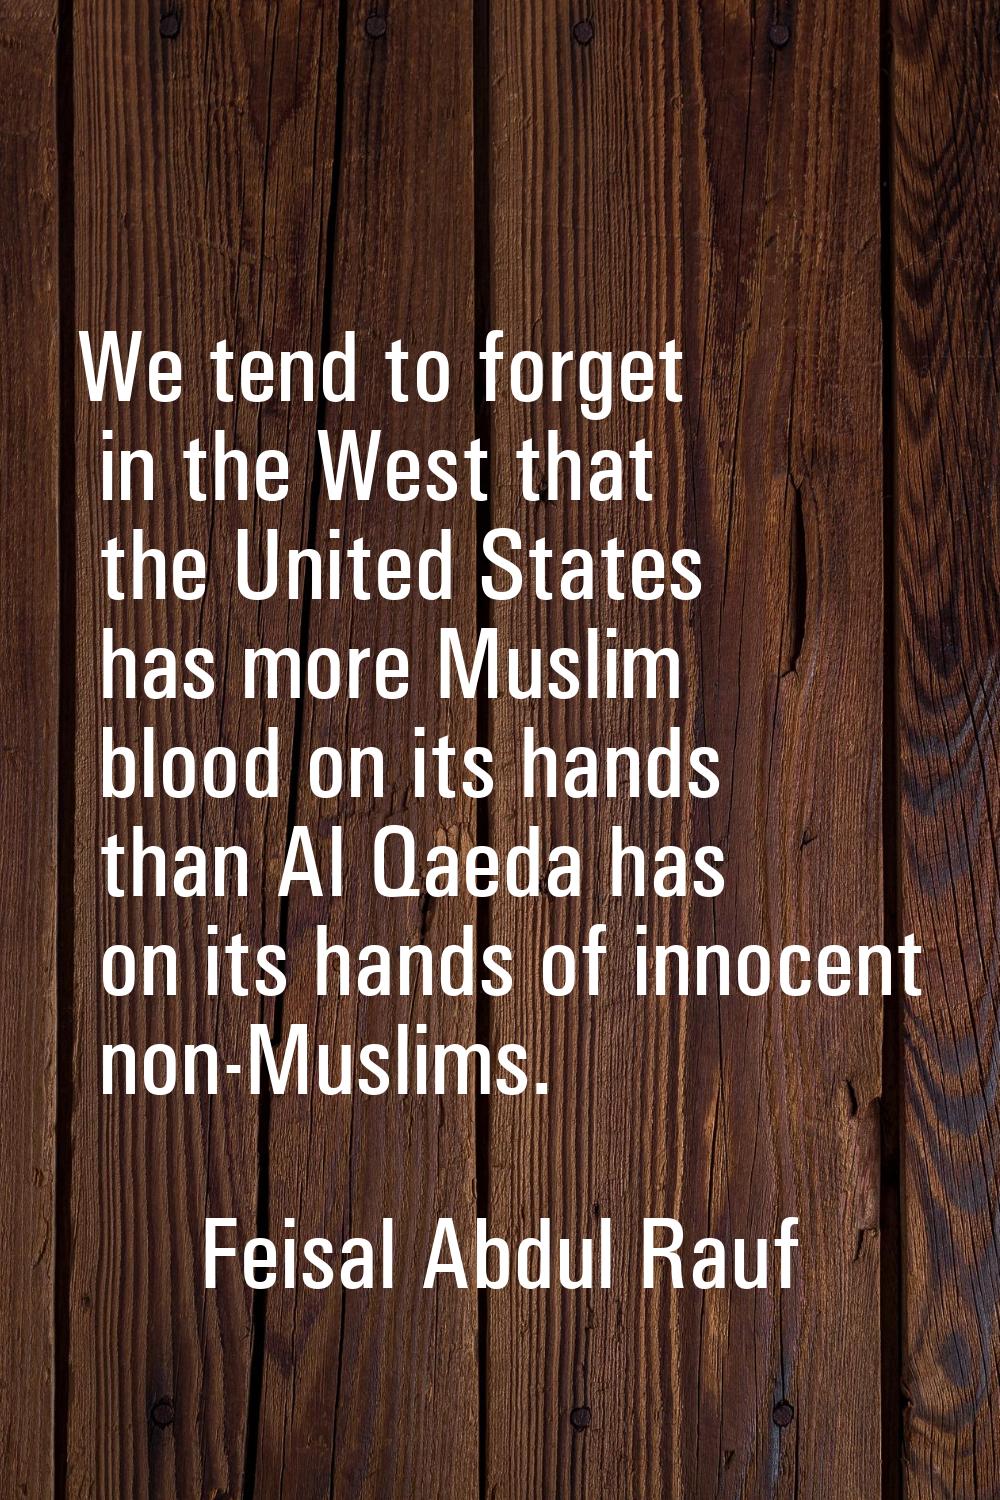 We tend to forget in the West that the United States has more Muslim blood on its hands than Al Qae